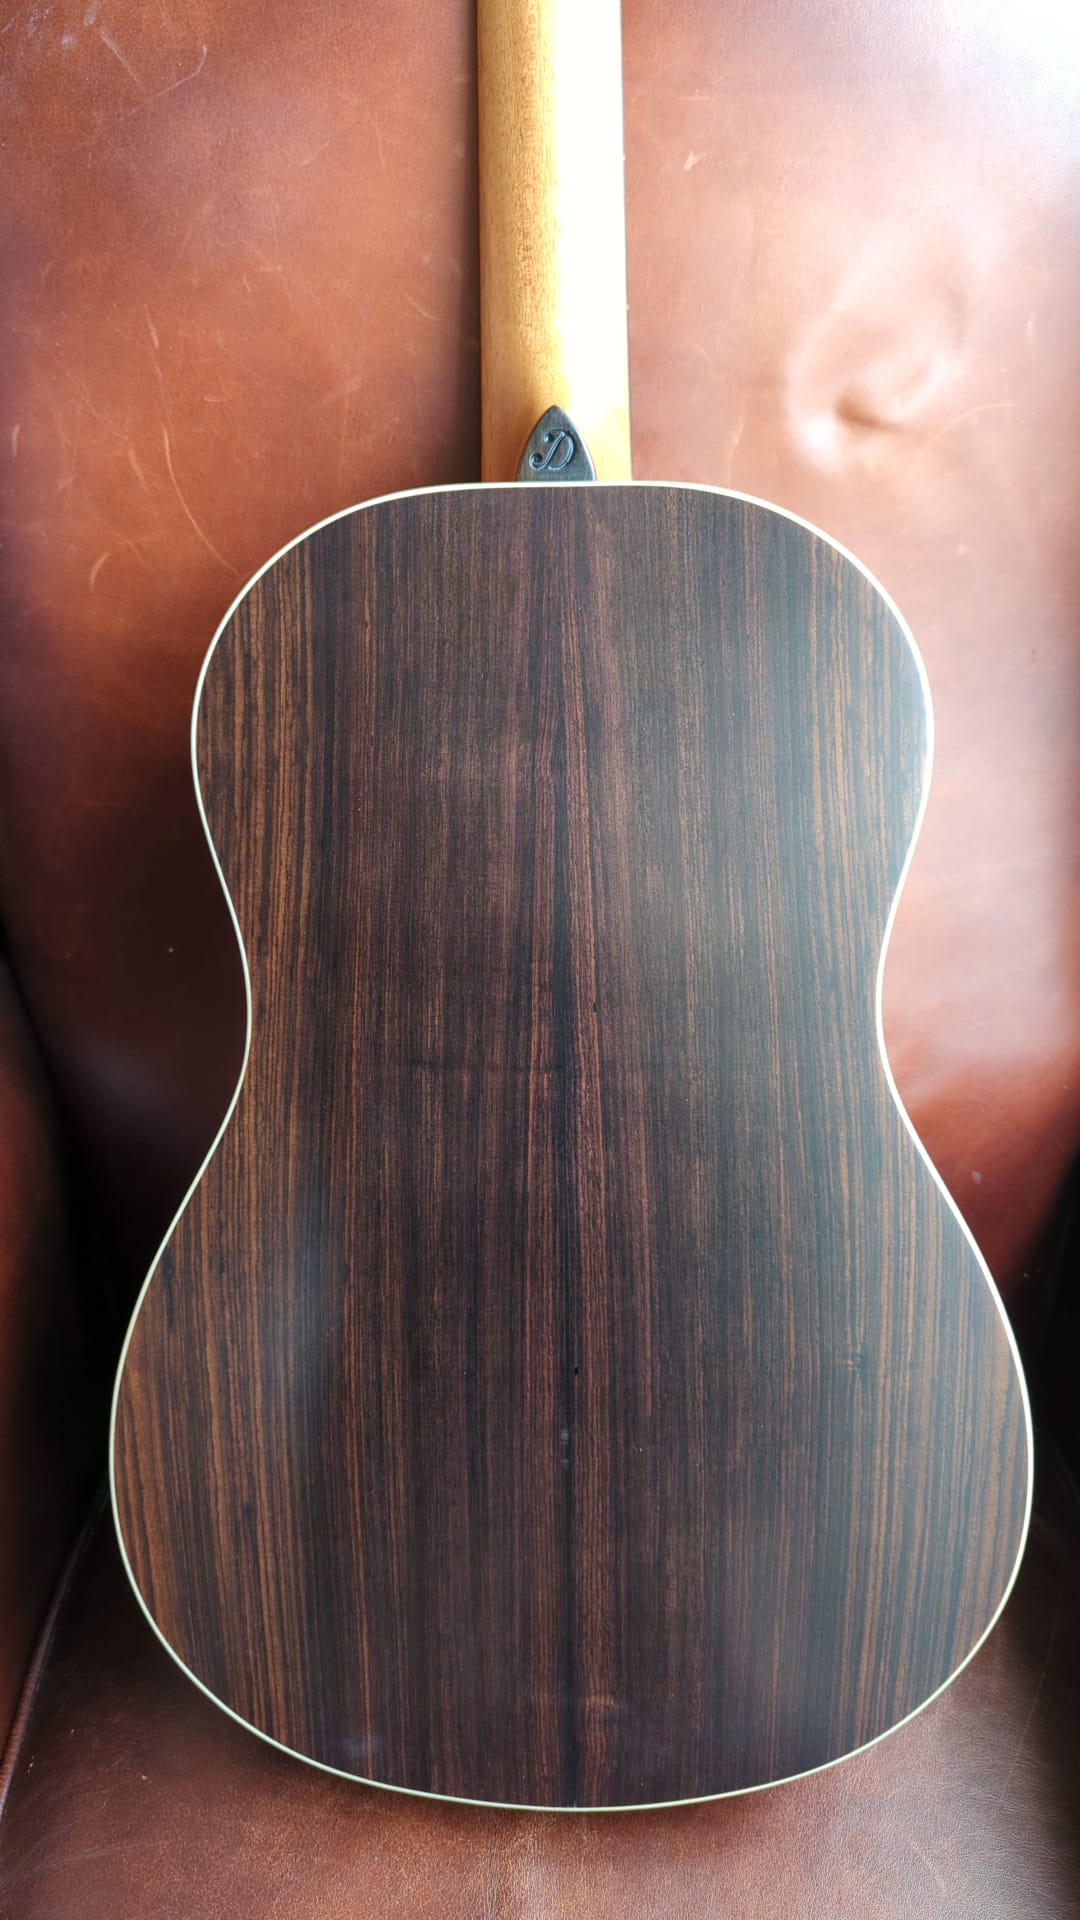 Dowina Rosewood DLX BV TSWS,  for sale at Richards Guitars.